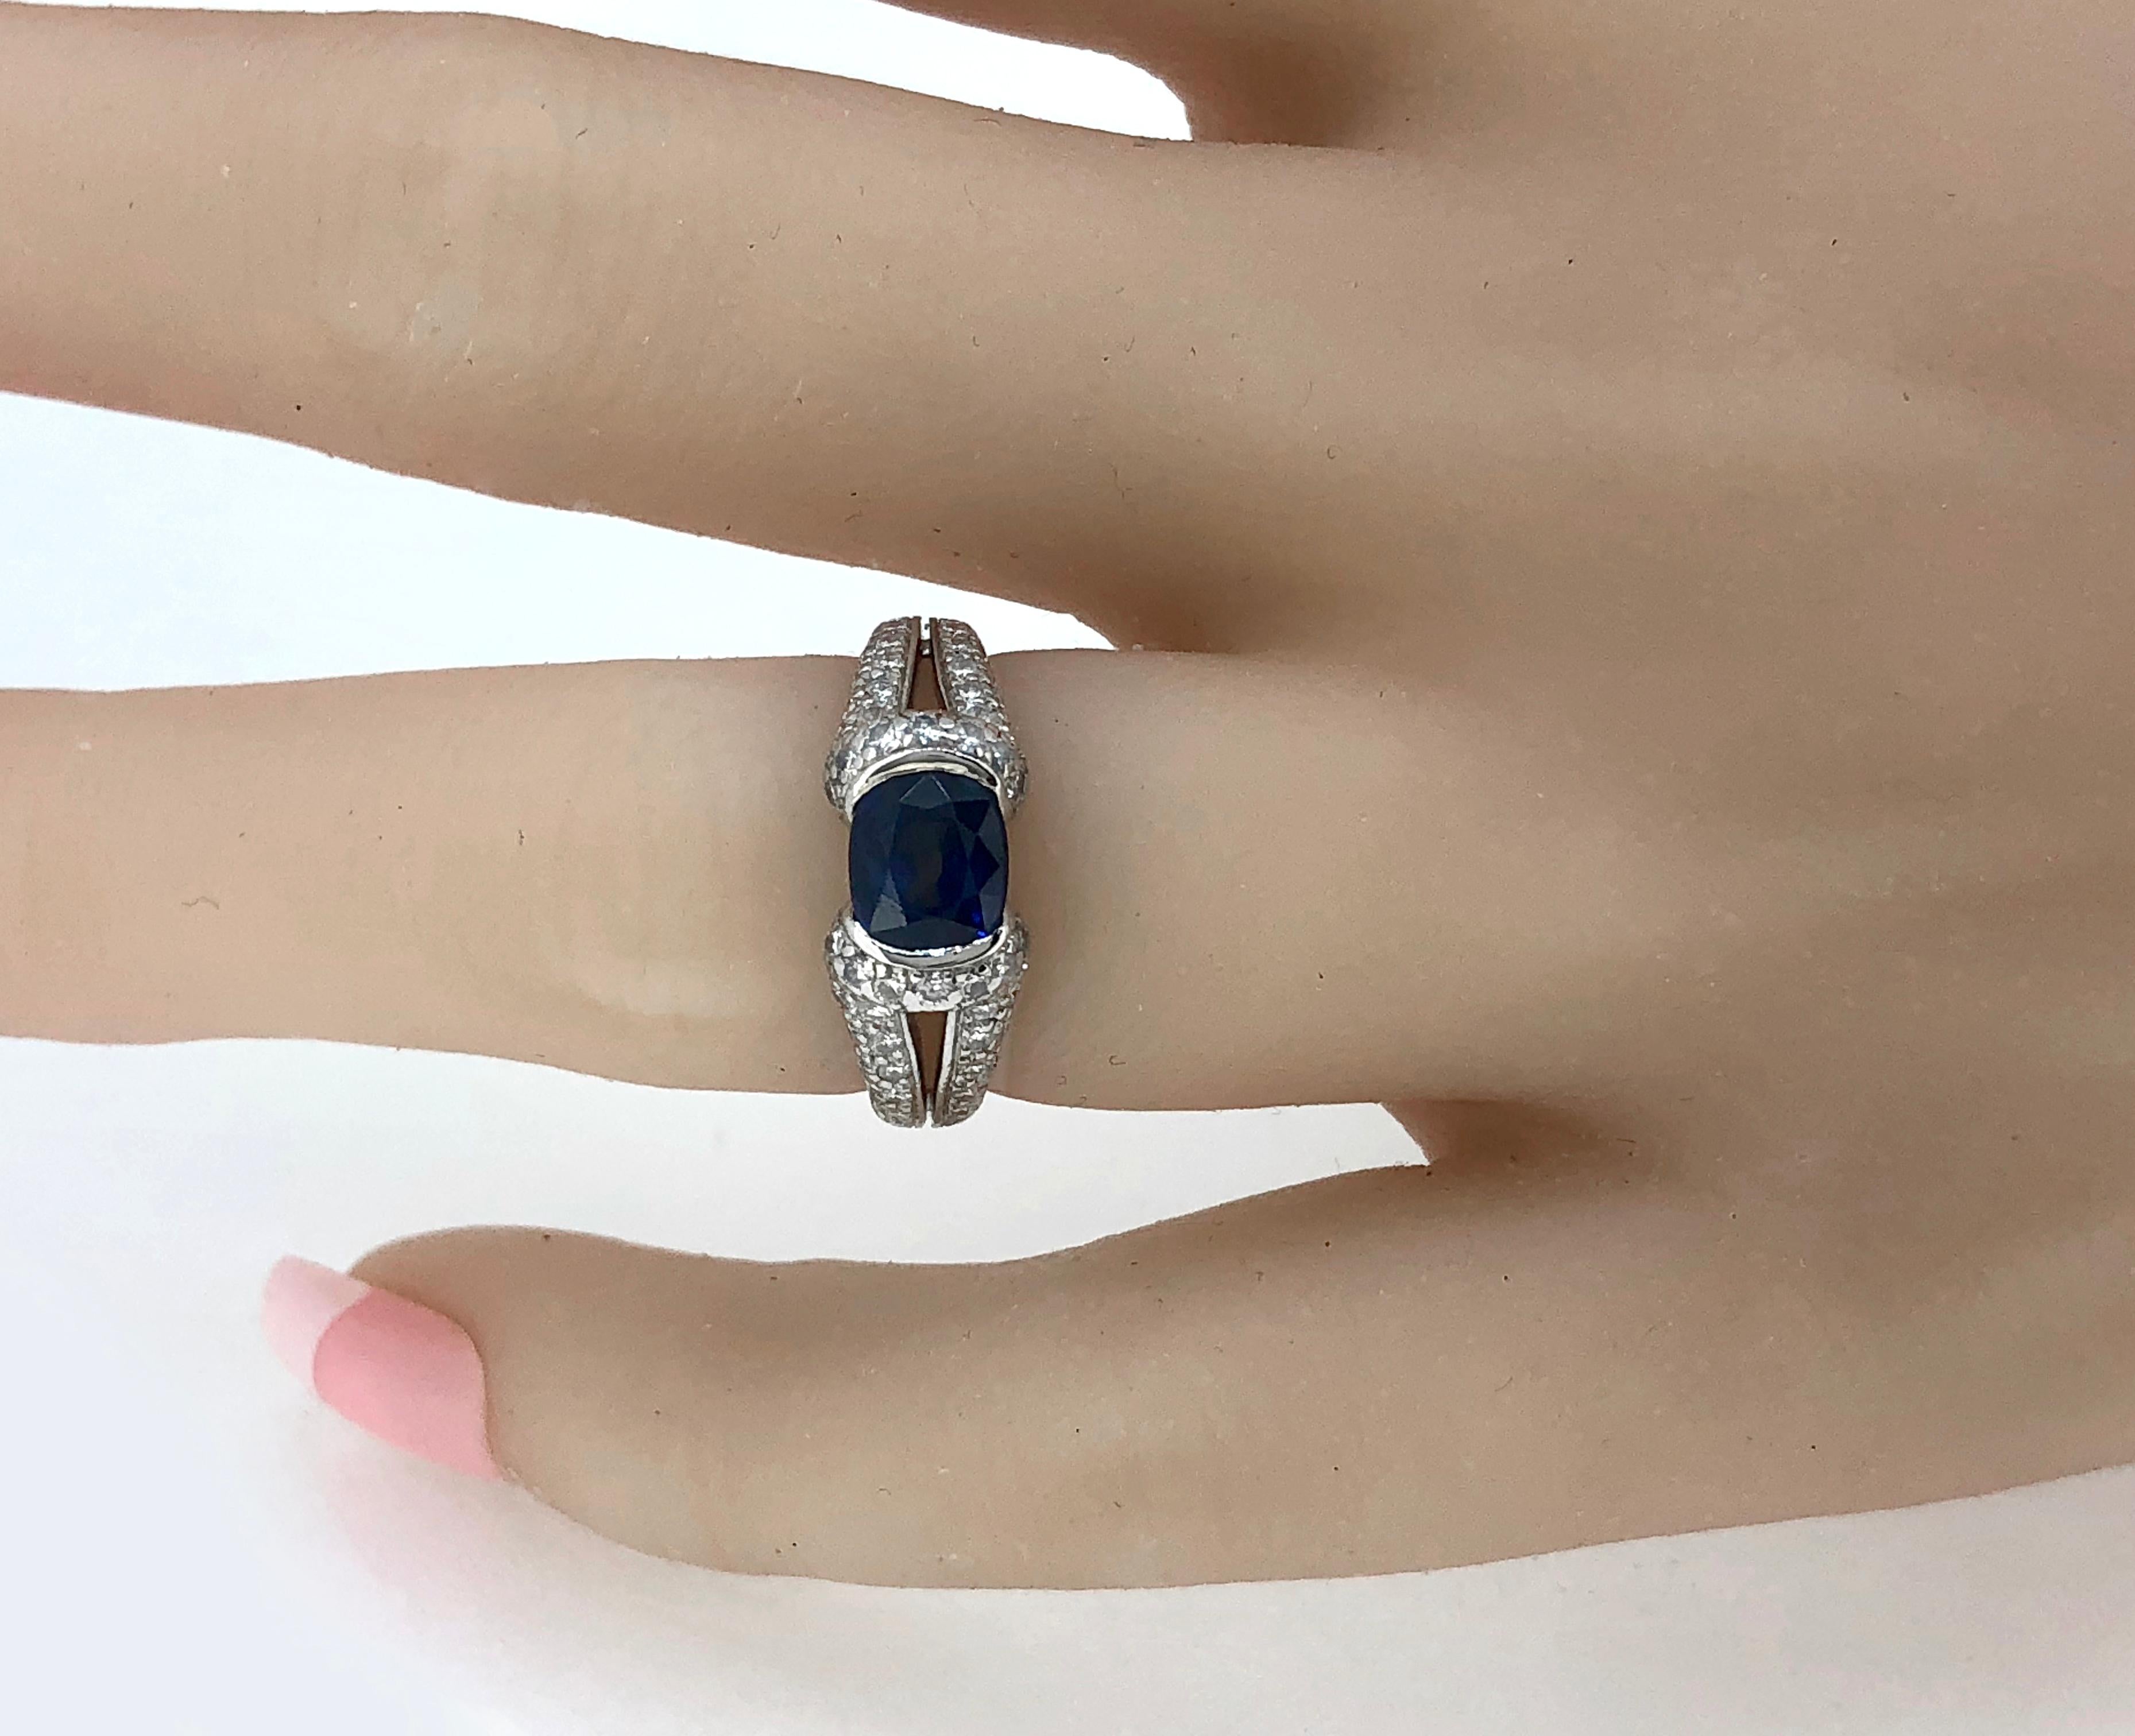 Eichhorn 1.75 Carat Sapphire Diamond Platinum Engagement Ring In Excellent Condition For Sale In Tampa, FL